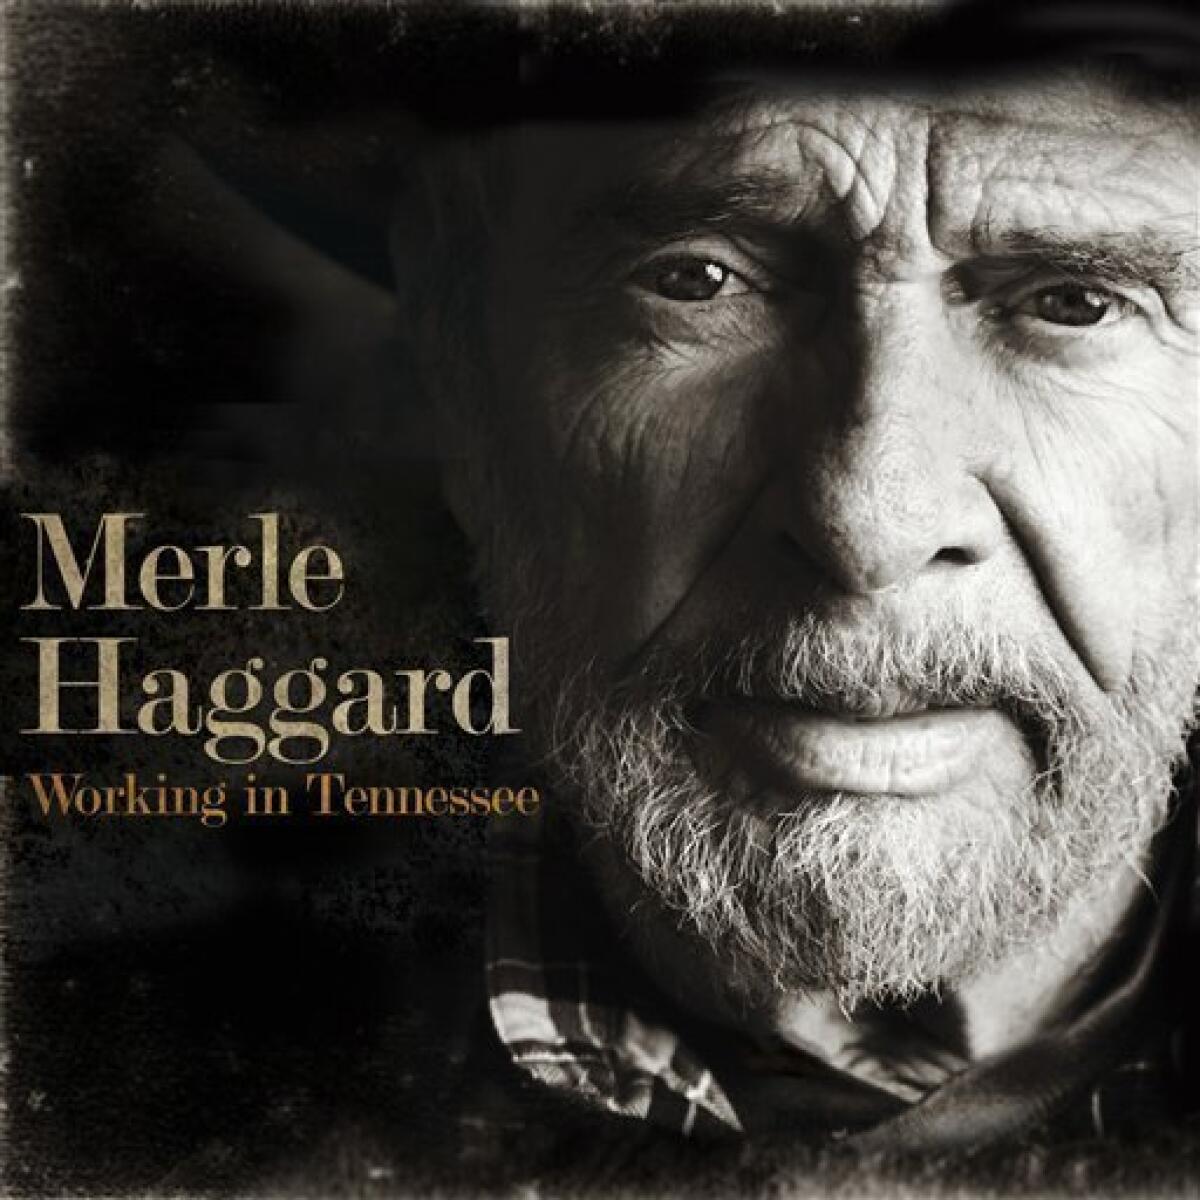 In this CD cover image released by Vanguard, the latest release by Merle Haggard, "Working in Tennessee," is shown. (AP Photo/Vanguard)